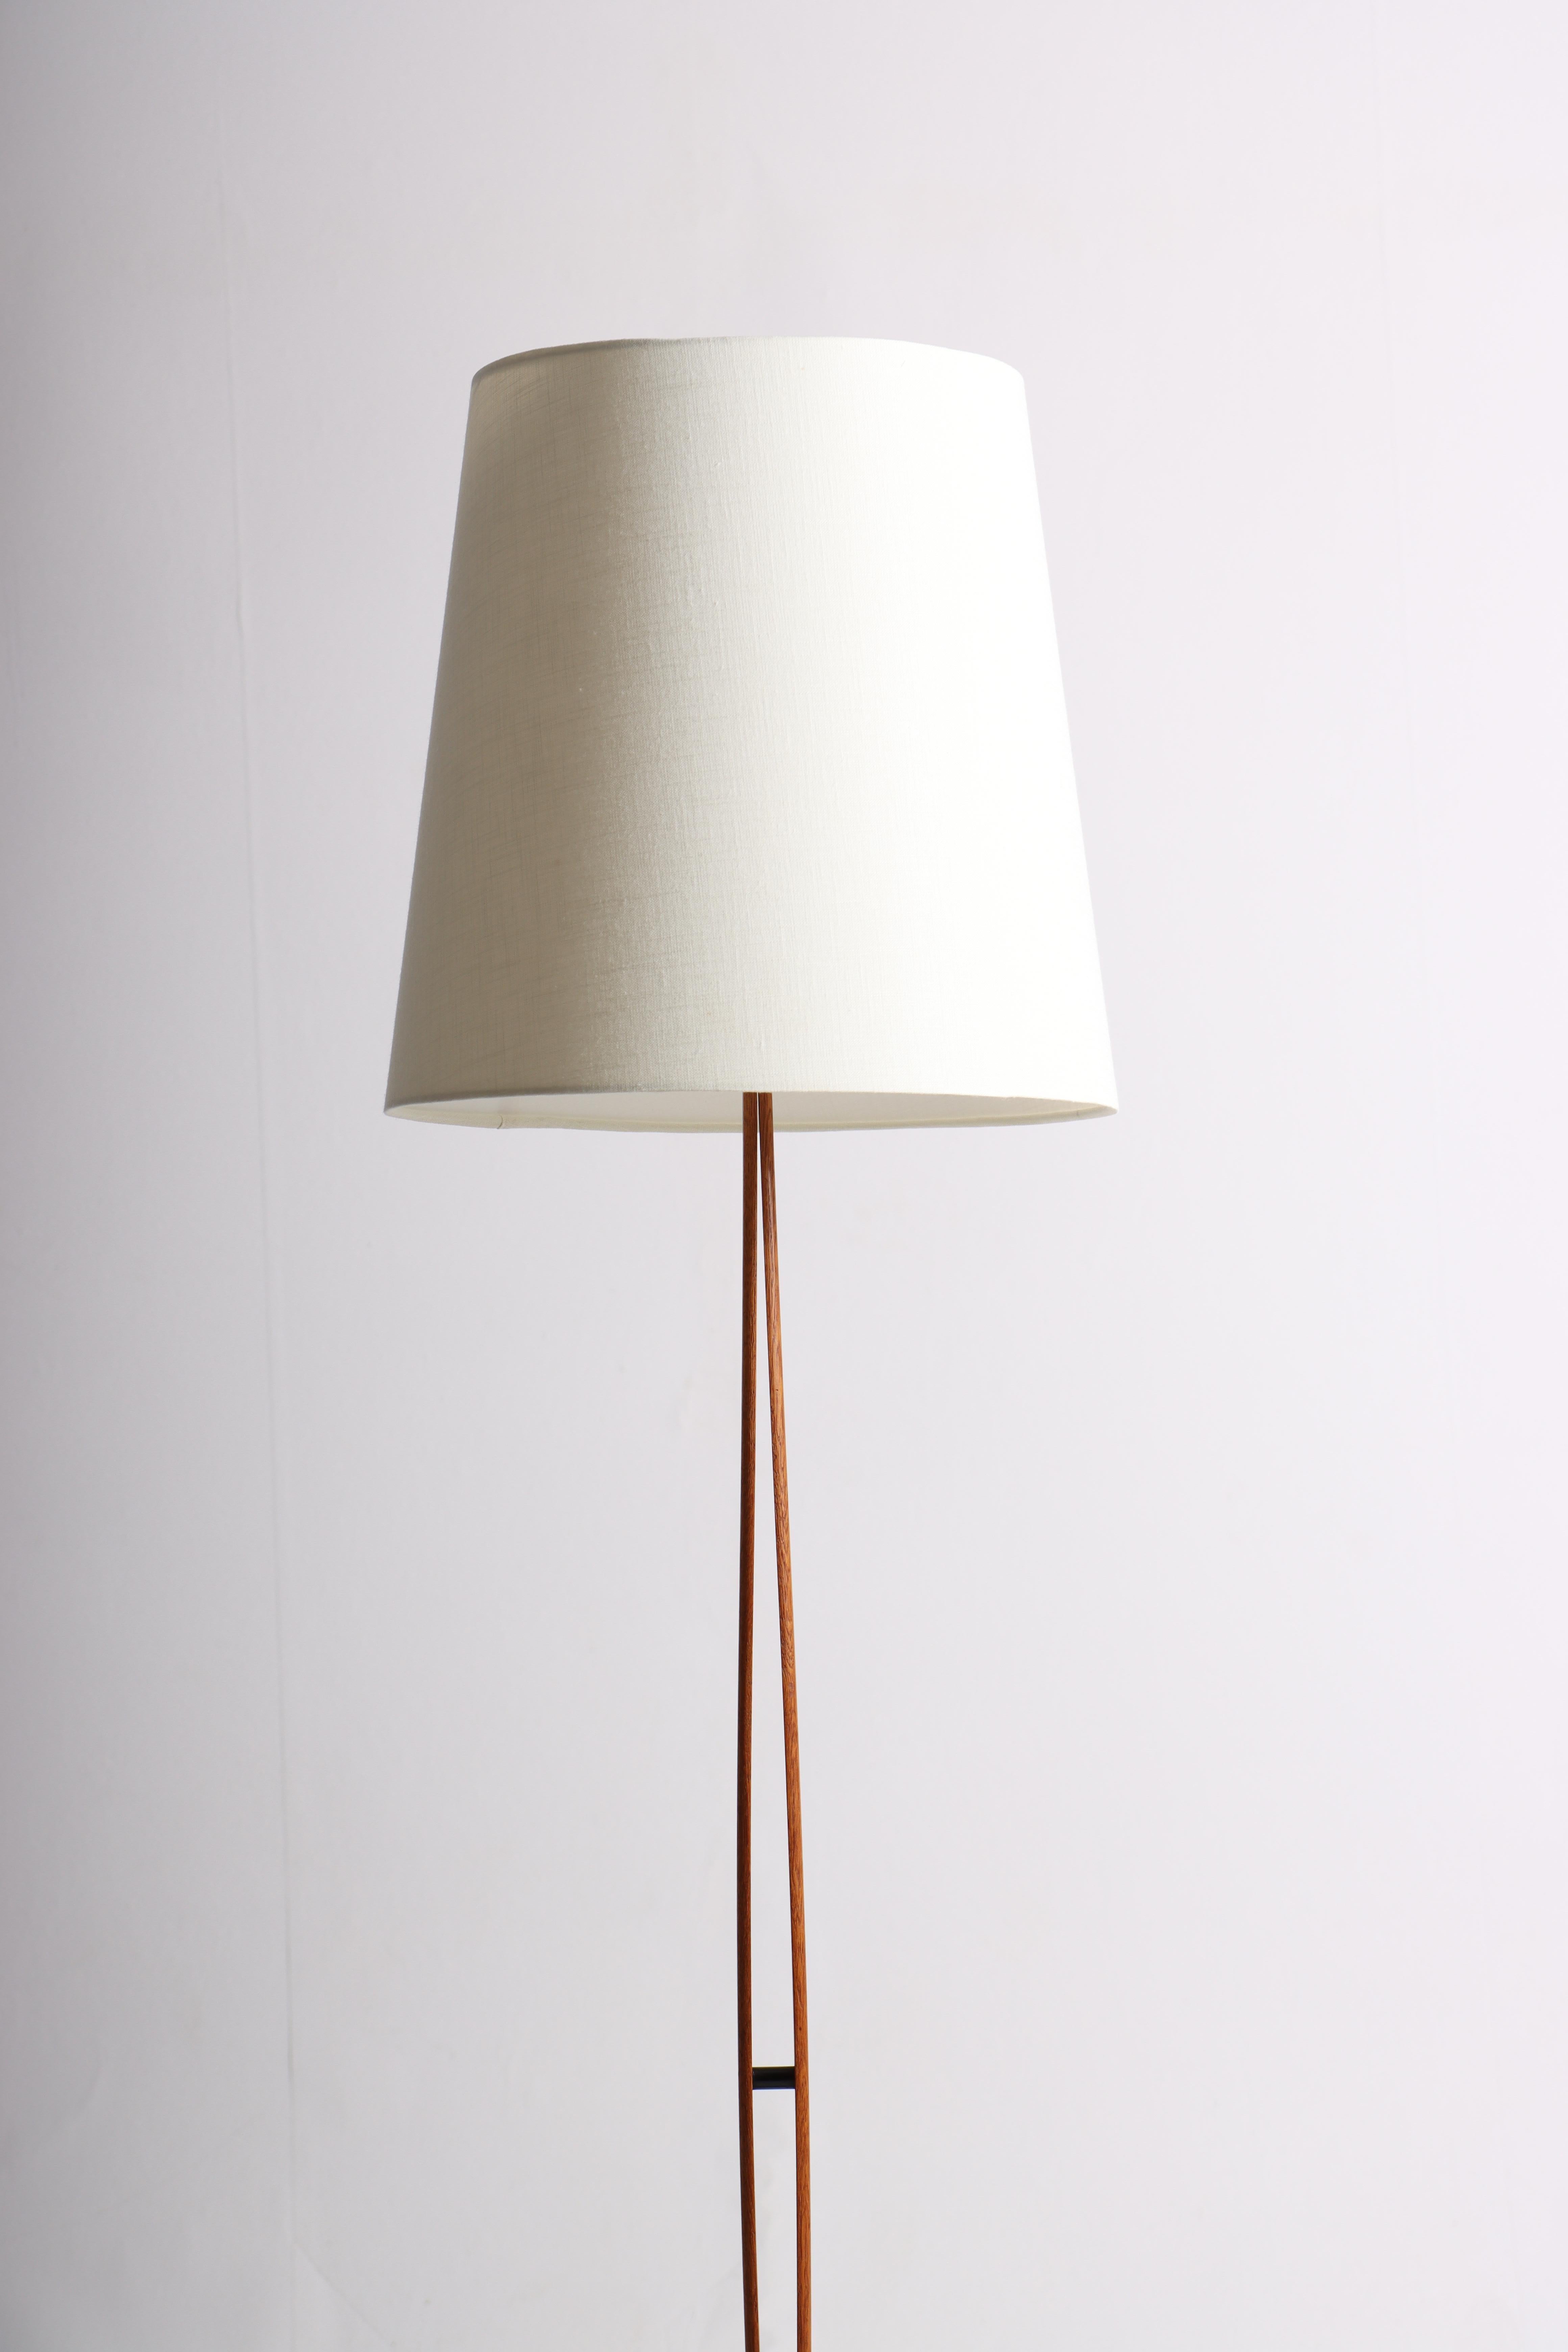 Great looking floor lamp in oak and new fabric shade. Designed and made in Denmark.